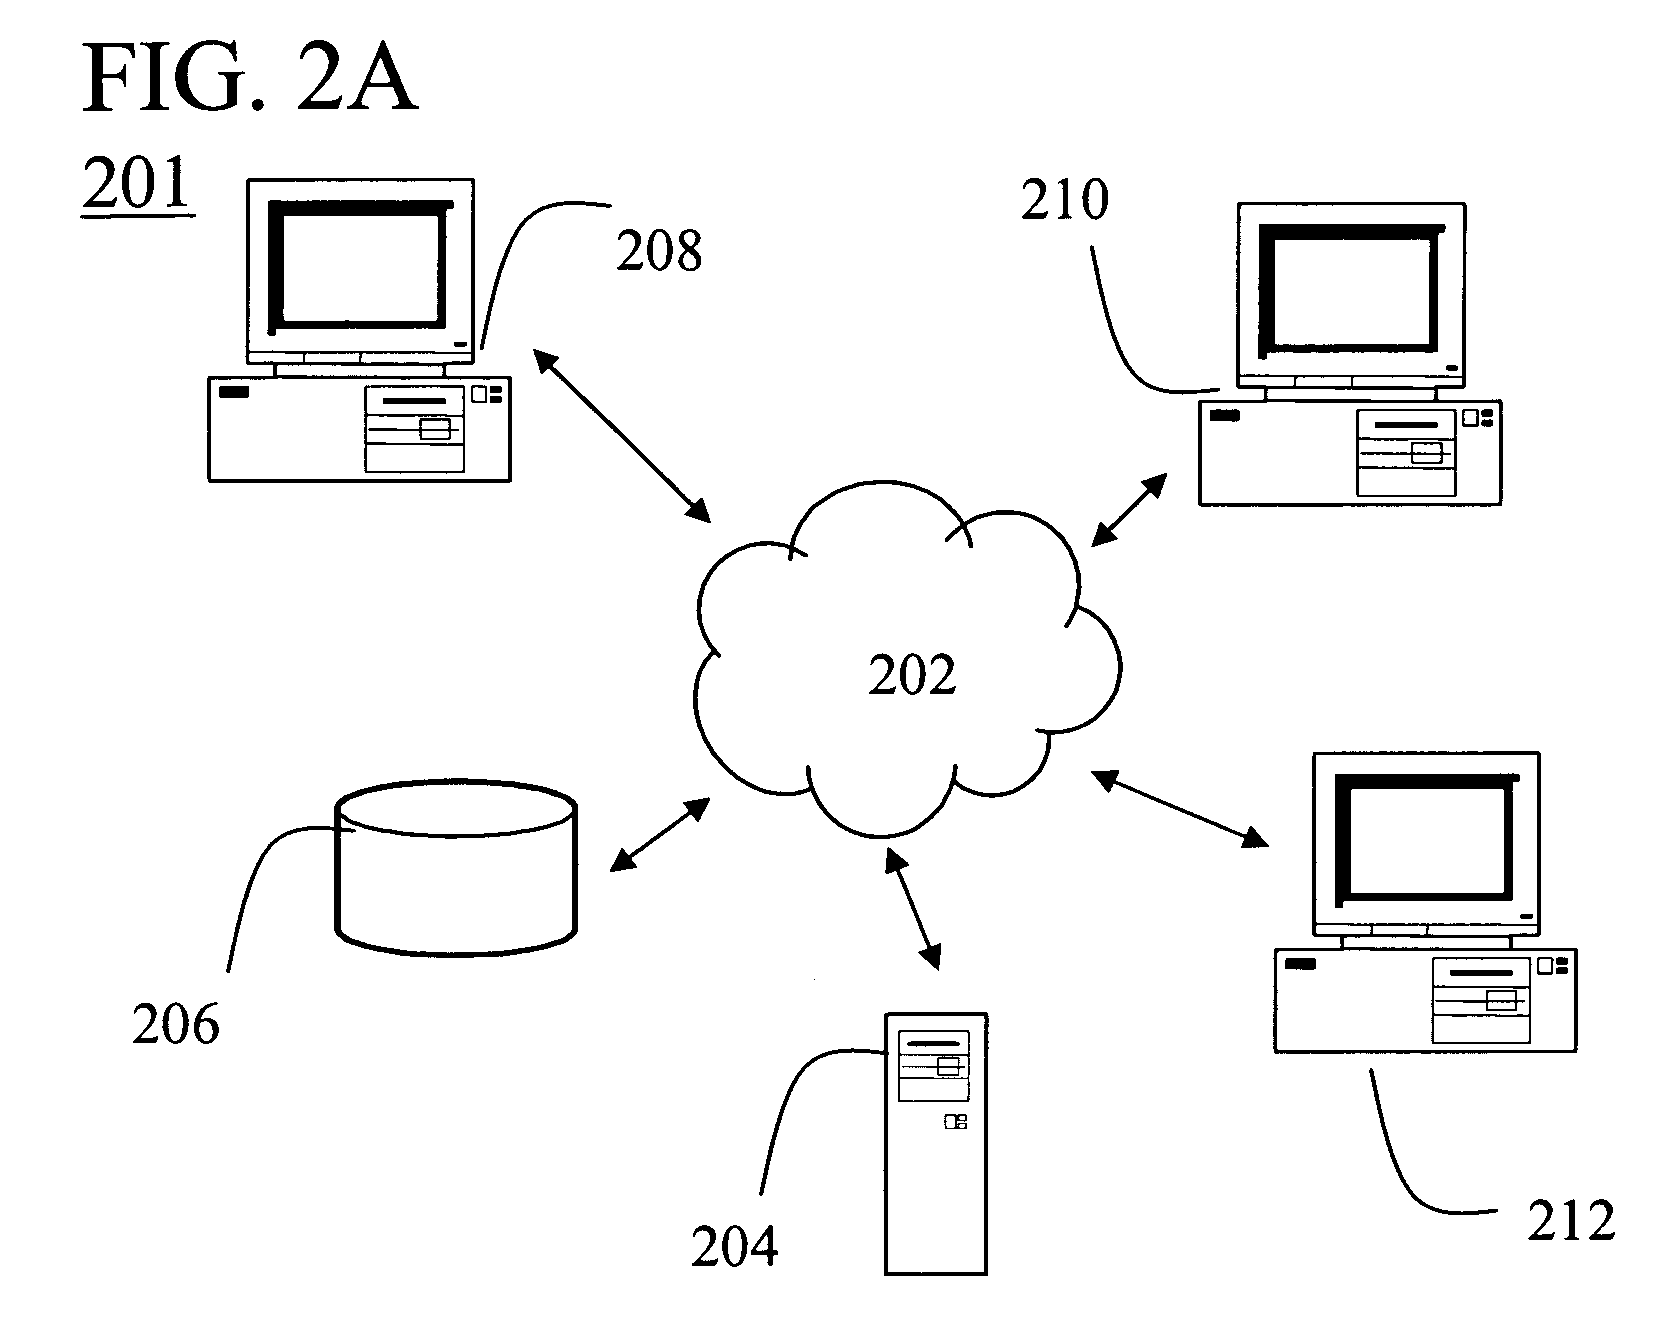 Method for operating software configured for internet access on a remote computer